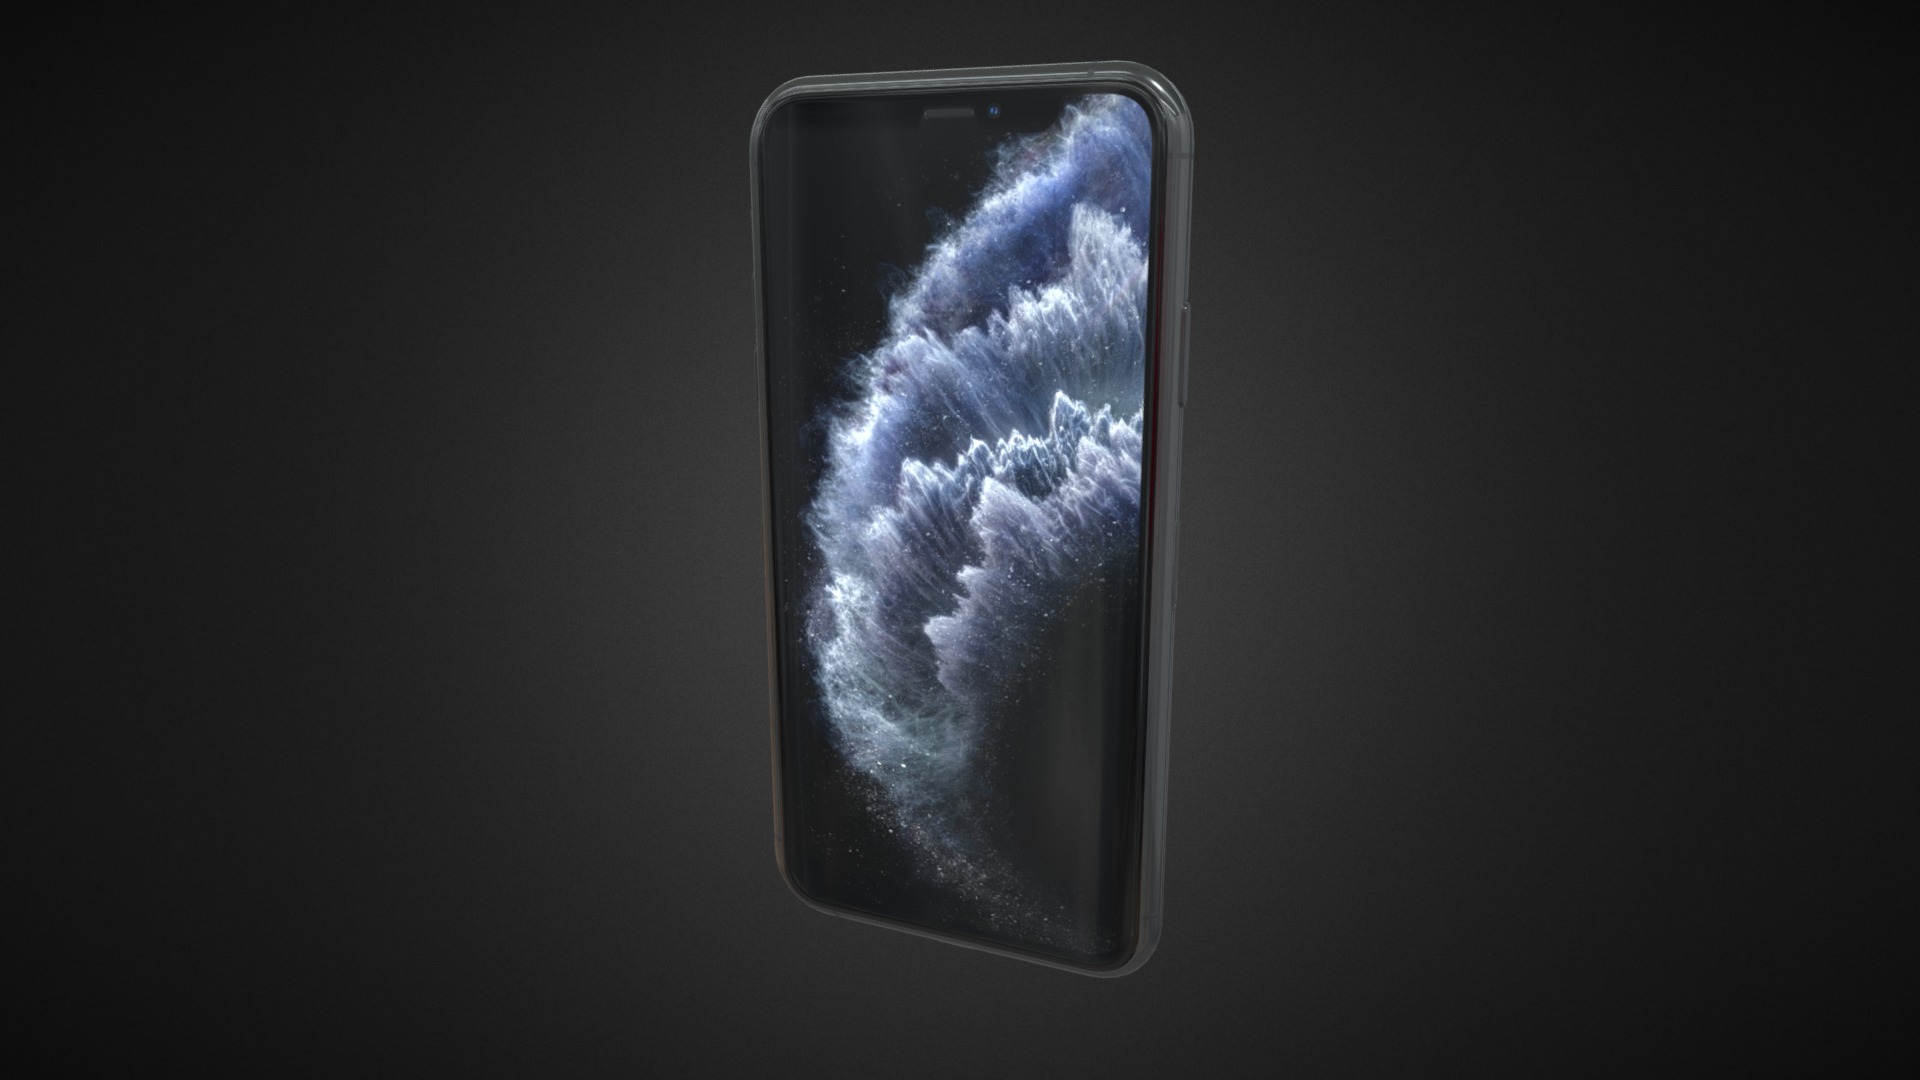 3D model iPhone 11 Pro Max Space Gray - This is a 3D model of the iPhone 11 Pro Max Space Gray. The 3D model is about a view of the earth from space.